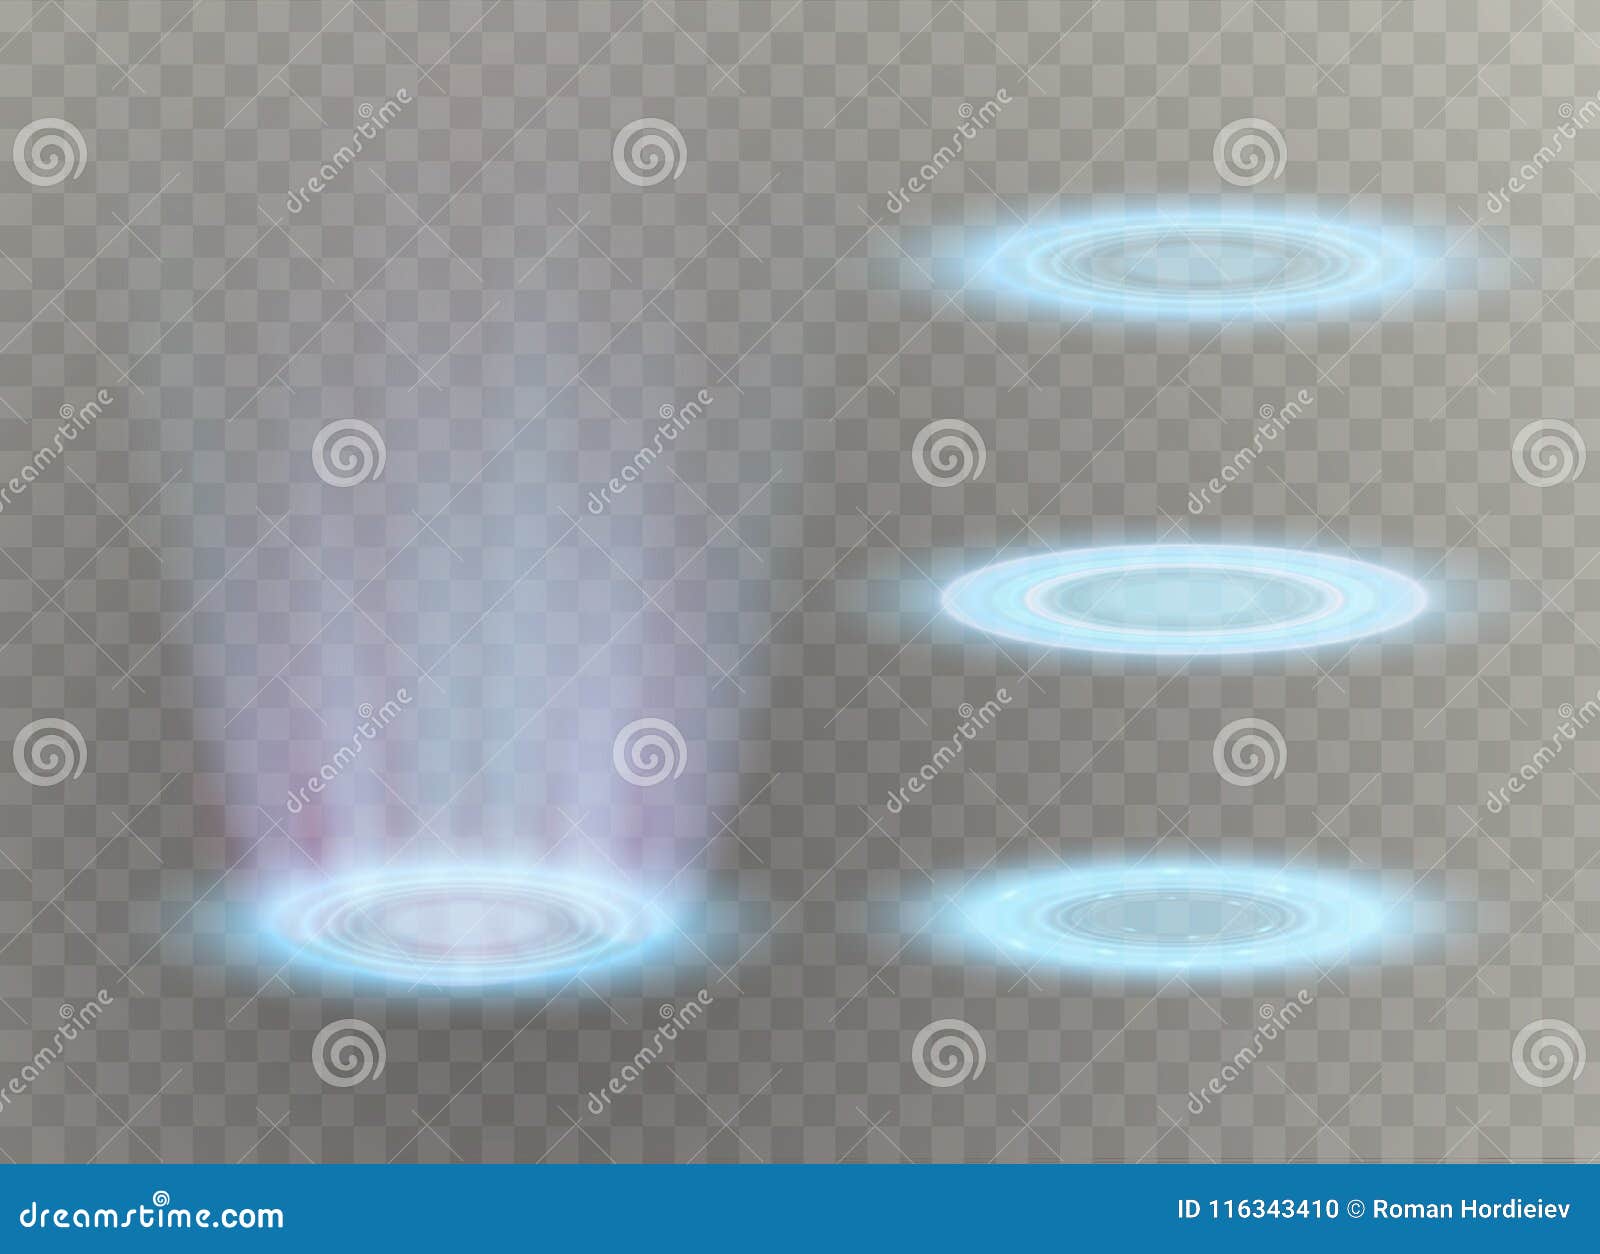 Magic Portal of Fantasy. Futuristic Teleport. Light Effect. Light Rays of the Night Scene and Sparks on a Transparent Stock Vector - Illustration of glow, 116343410